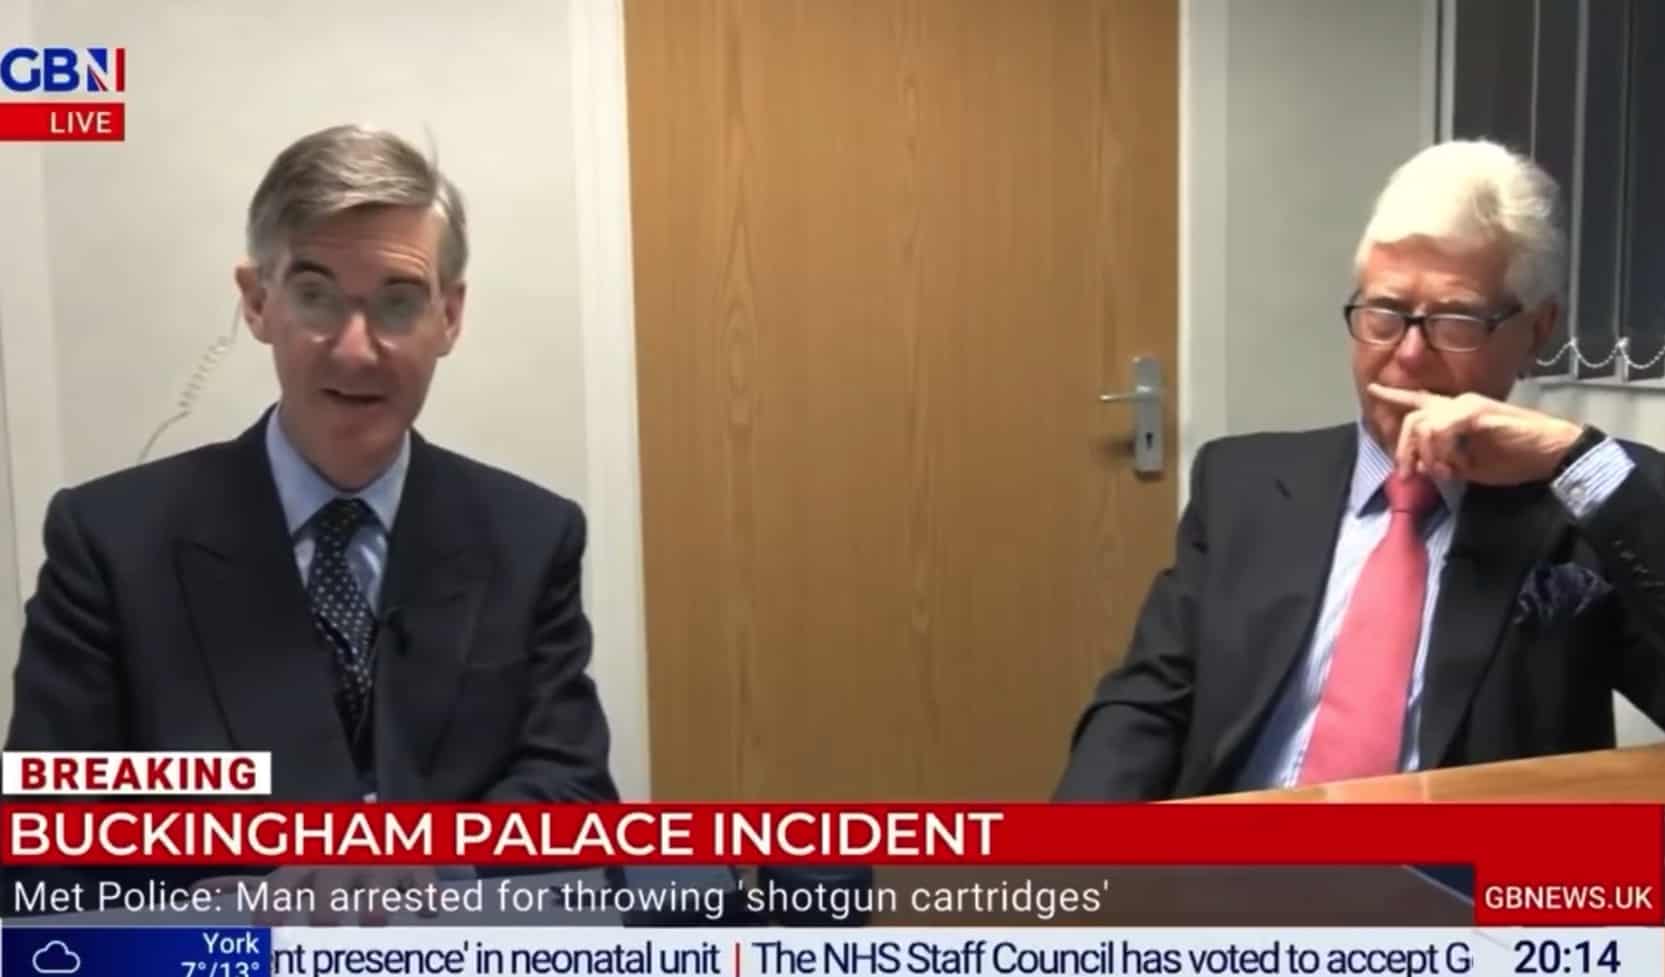 Jacob Rees-Mogg forced to evacuate GB News studio while police carry out controlled explosion